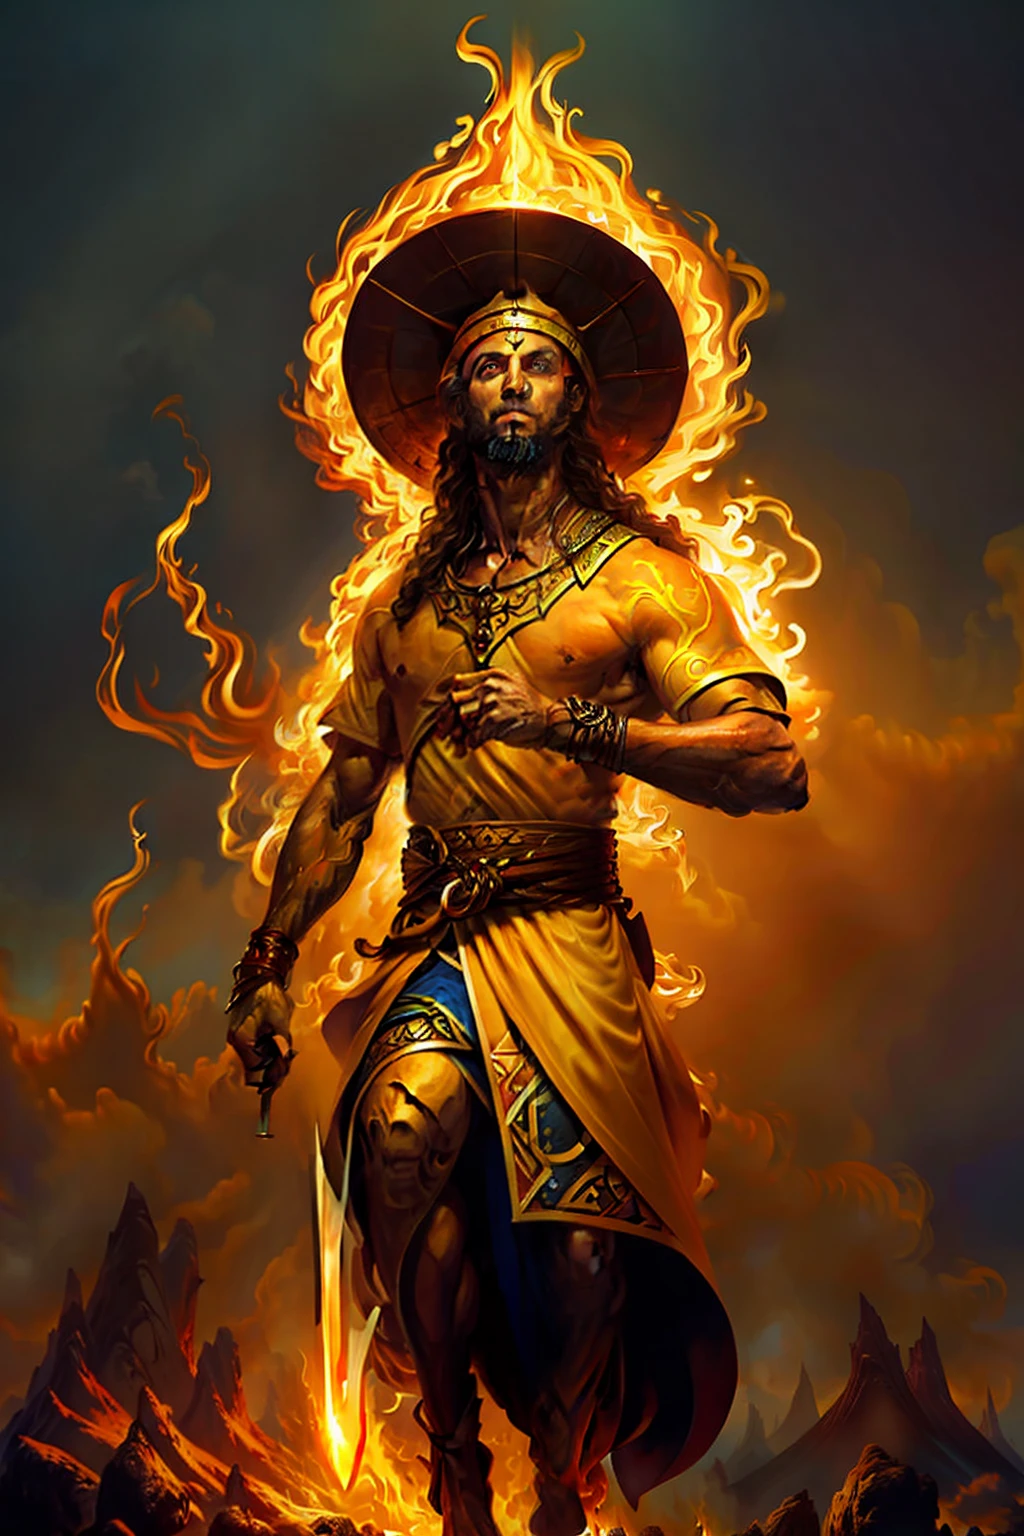 high qualiy, 4K, high resolution. God of Fire, imposing warrior, flames dancing in his eyes, fire aura surrounding your body; carries a flaming spear; golden skin, hair made of flames. serious face, front-facing.